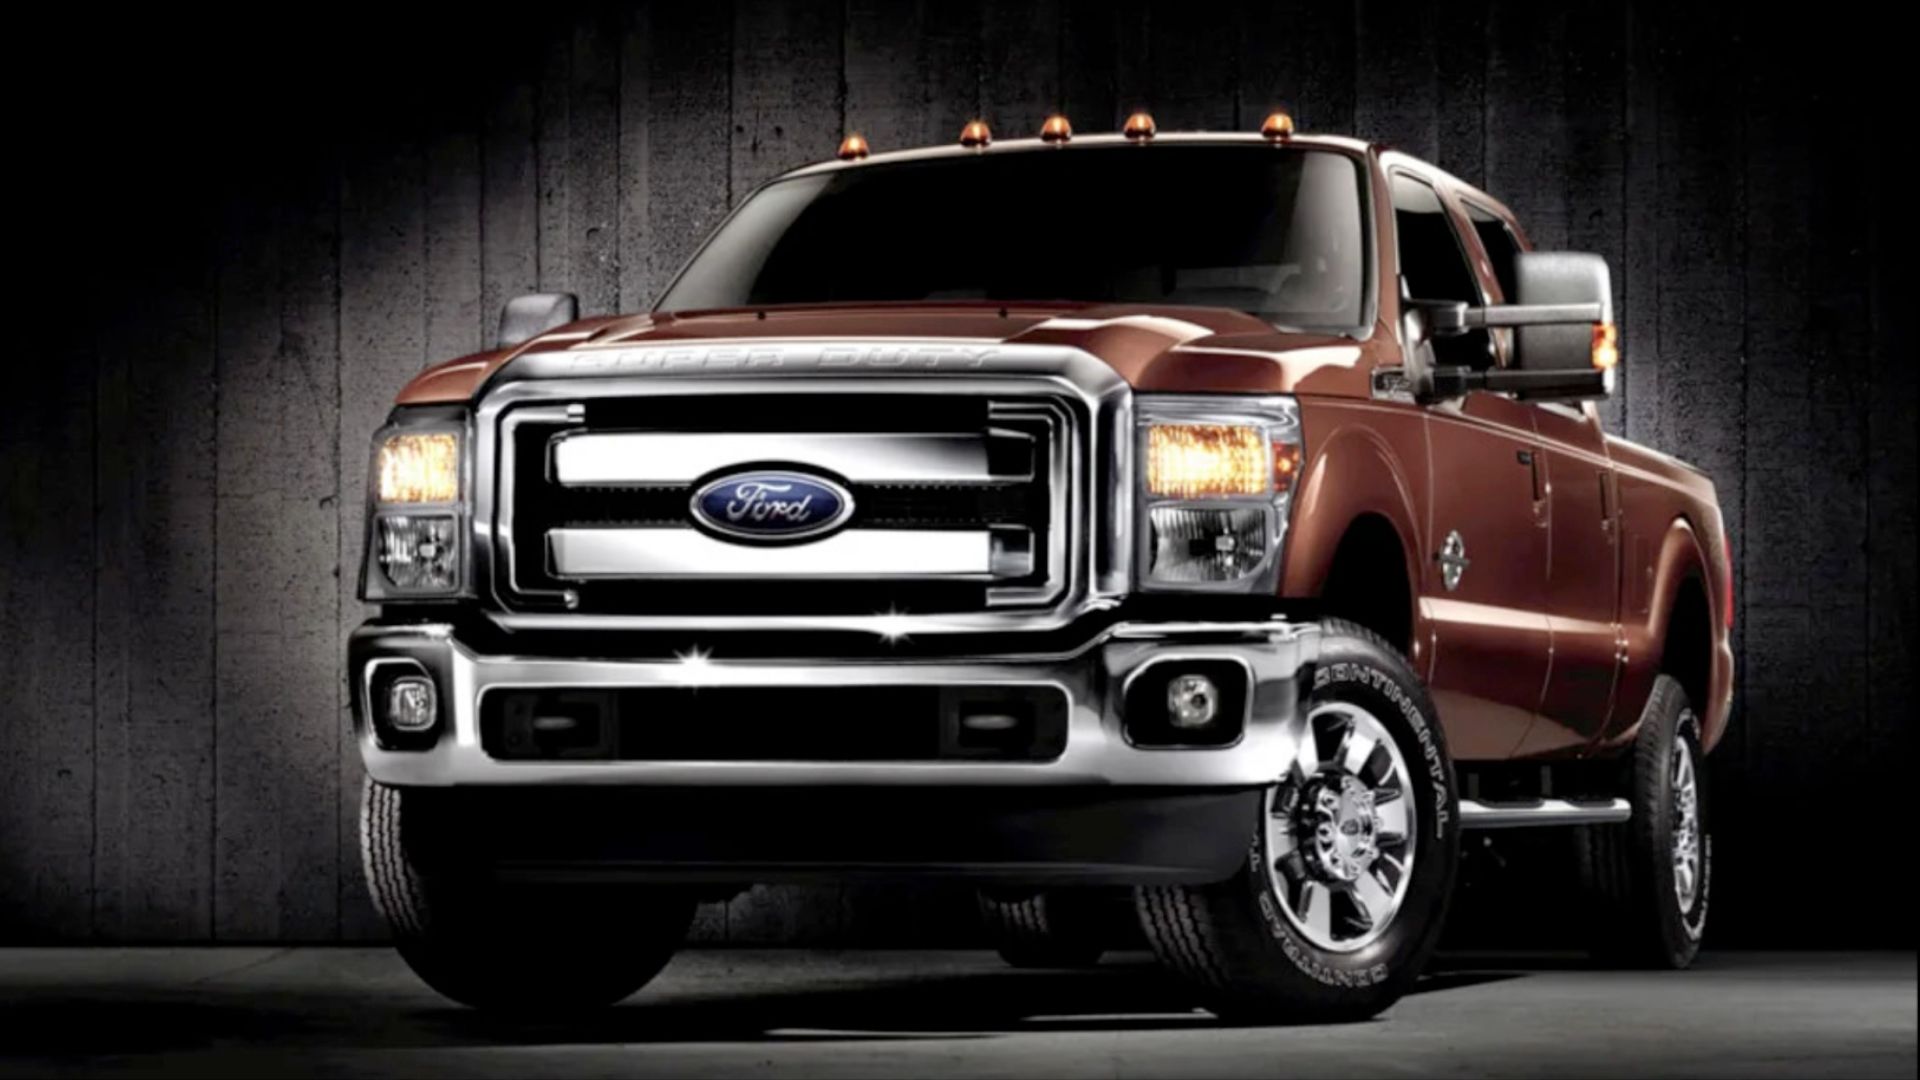 2011 Ford F-350 Super Duty Front Quarter View